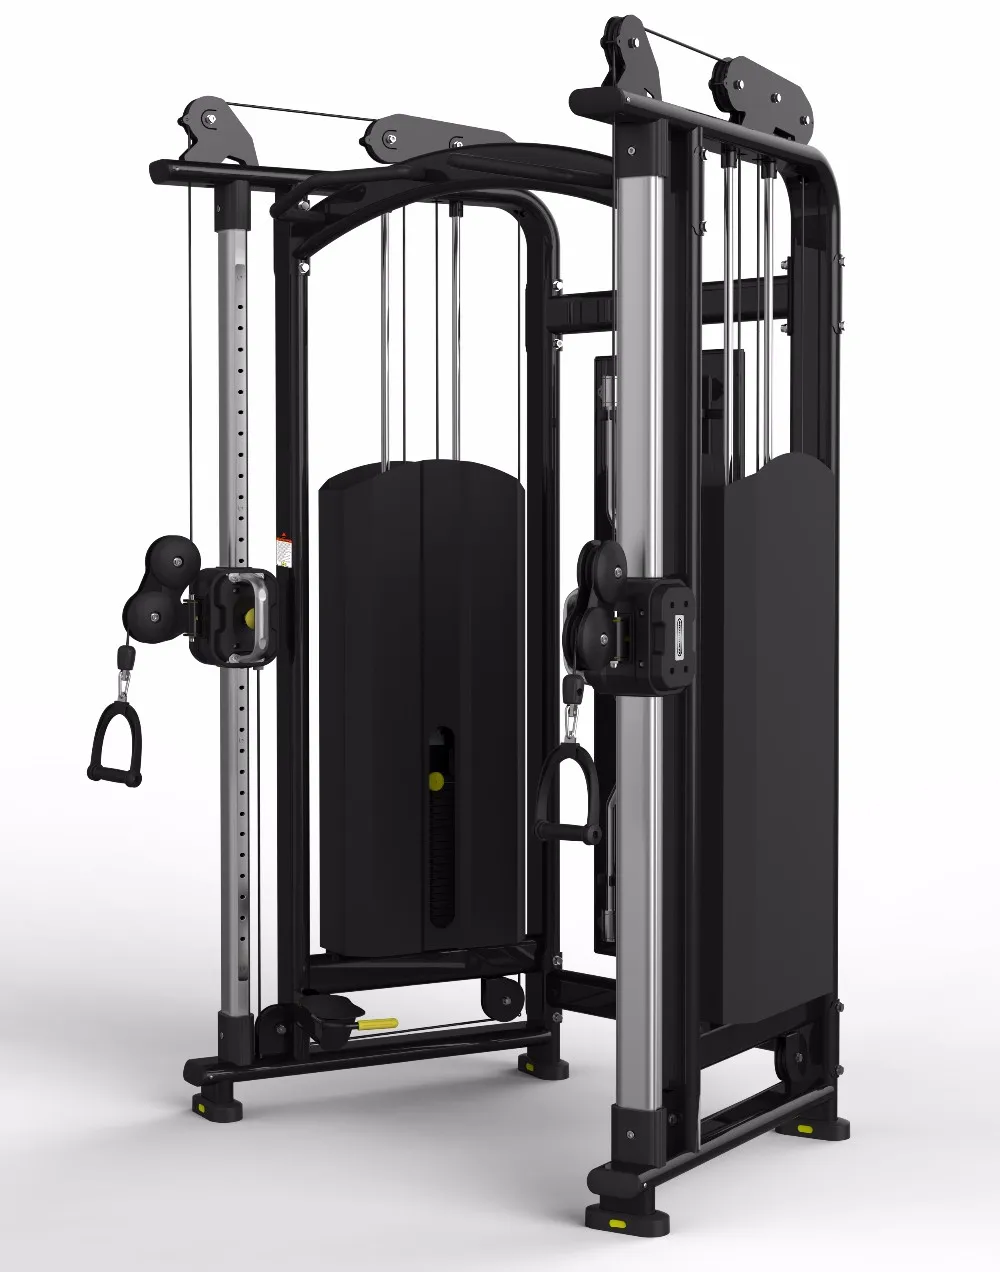 Multi Function Gym Machine Bench Jw Sport Xh 005a Cn Shn View Multi Function Gym Machine Jw Sport Product Details From Shan Dong Mbh Fitness Co Ltd On Alibaba Com